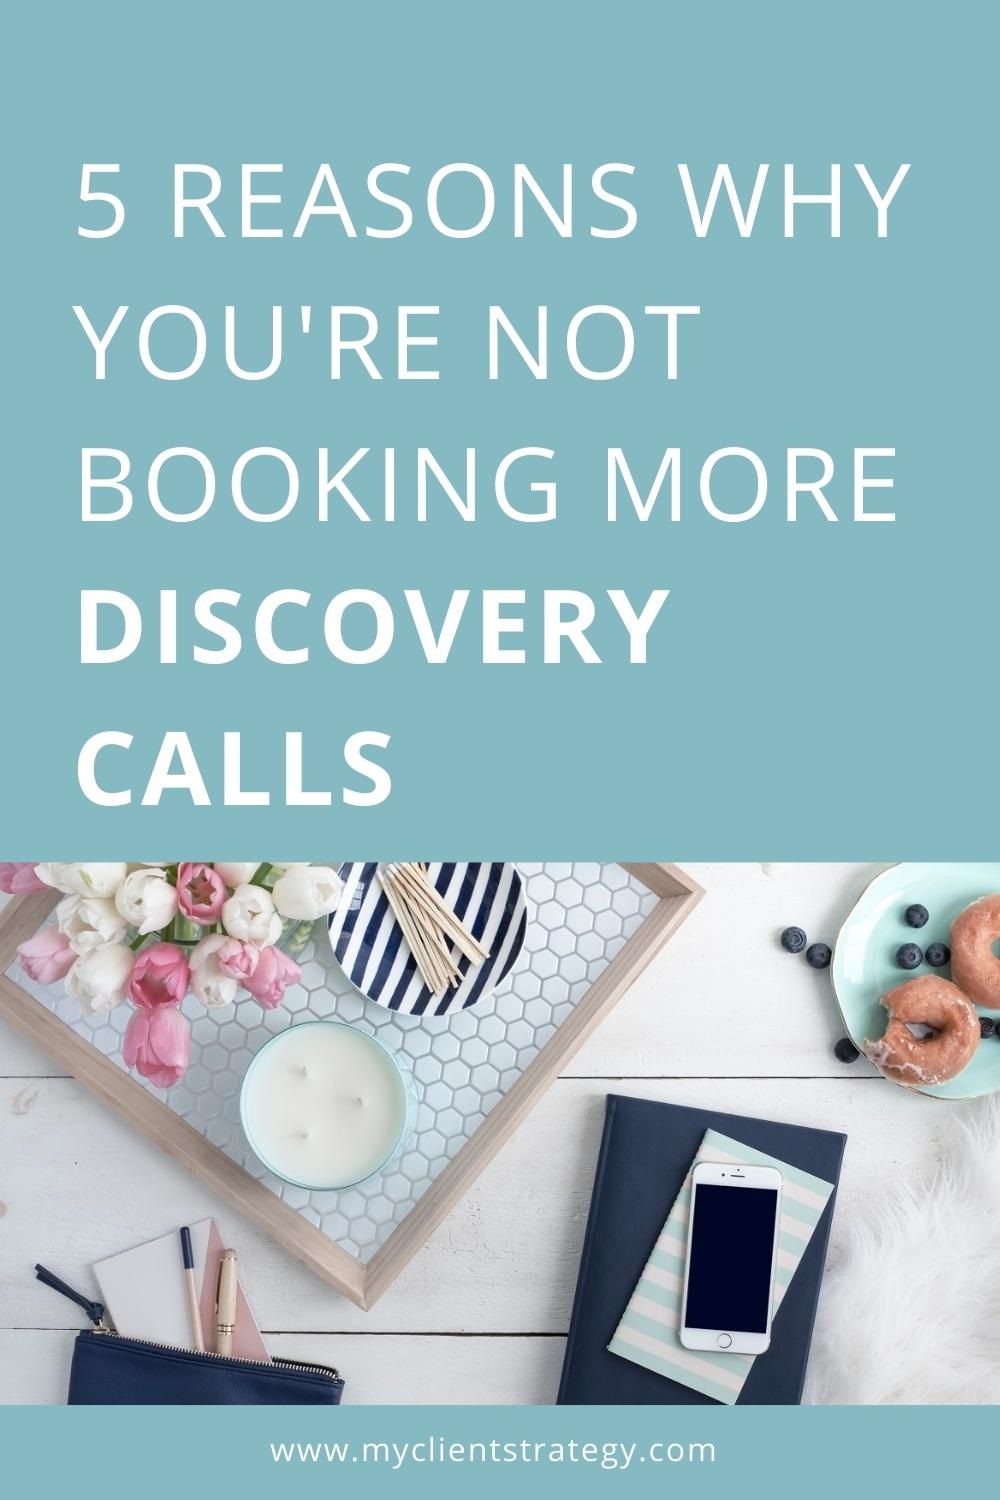 5 reasons why you are not booking more discovery calls